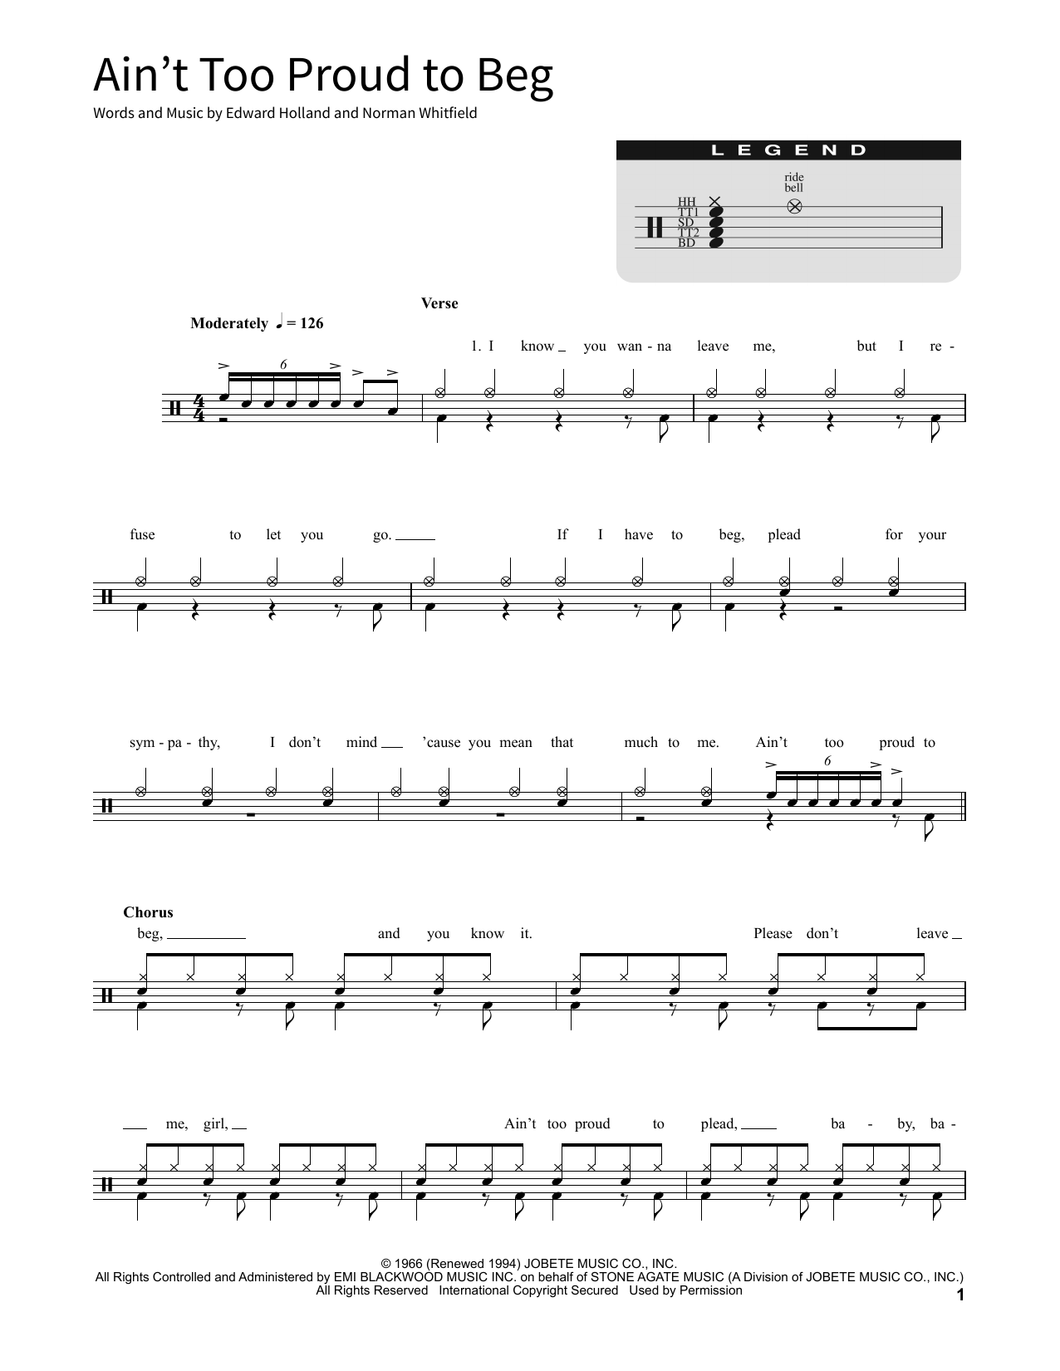 Ain't Too Proud to Beg - The Temptations - Full Drum Transcription / Drum Sheet Music - SheetMusicDirect SORD